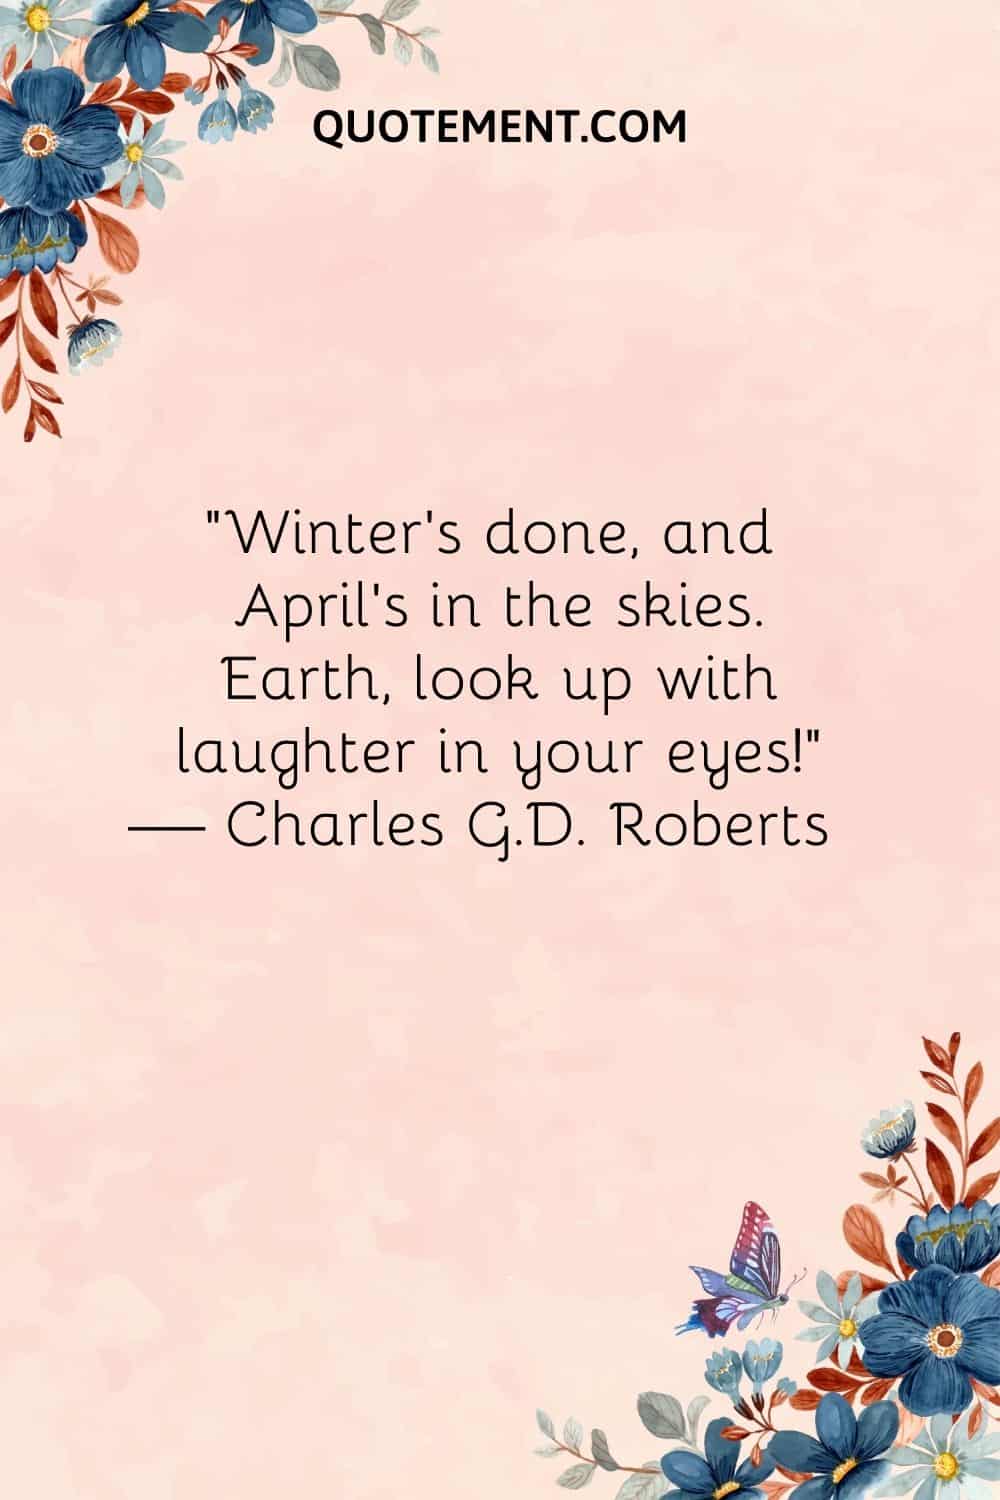 Winter’s done, and April’s in the skies. Earth, look up with laughter in your eyes